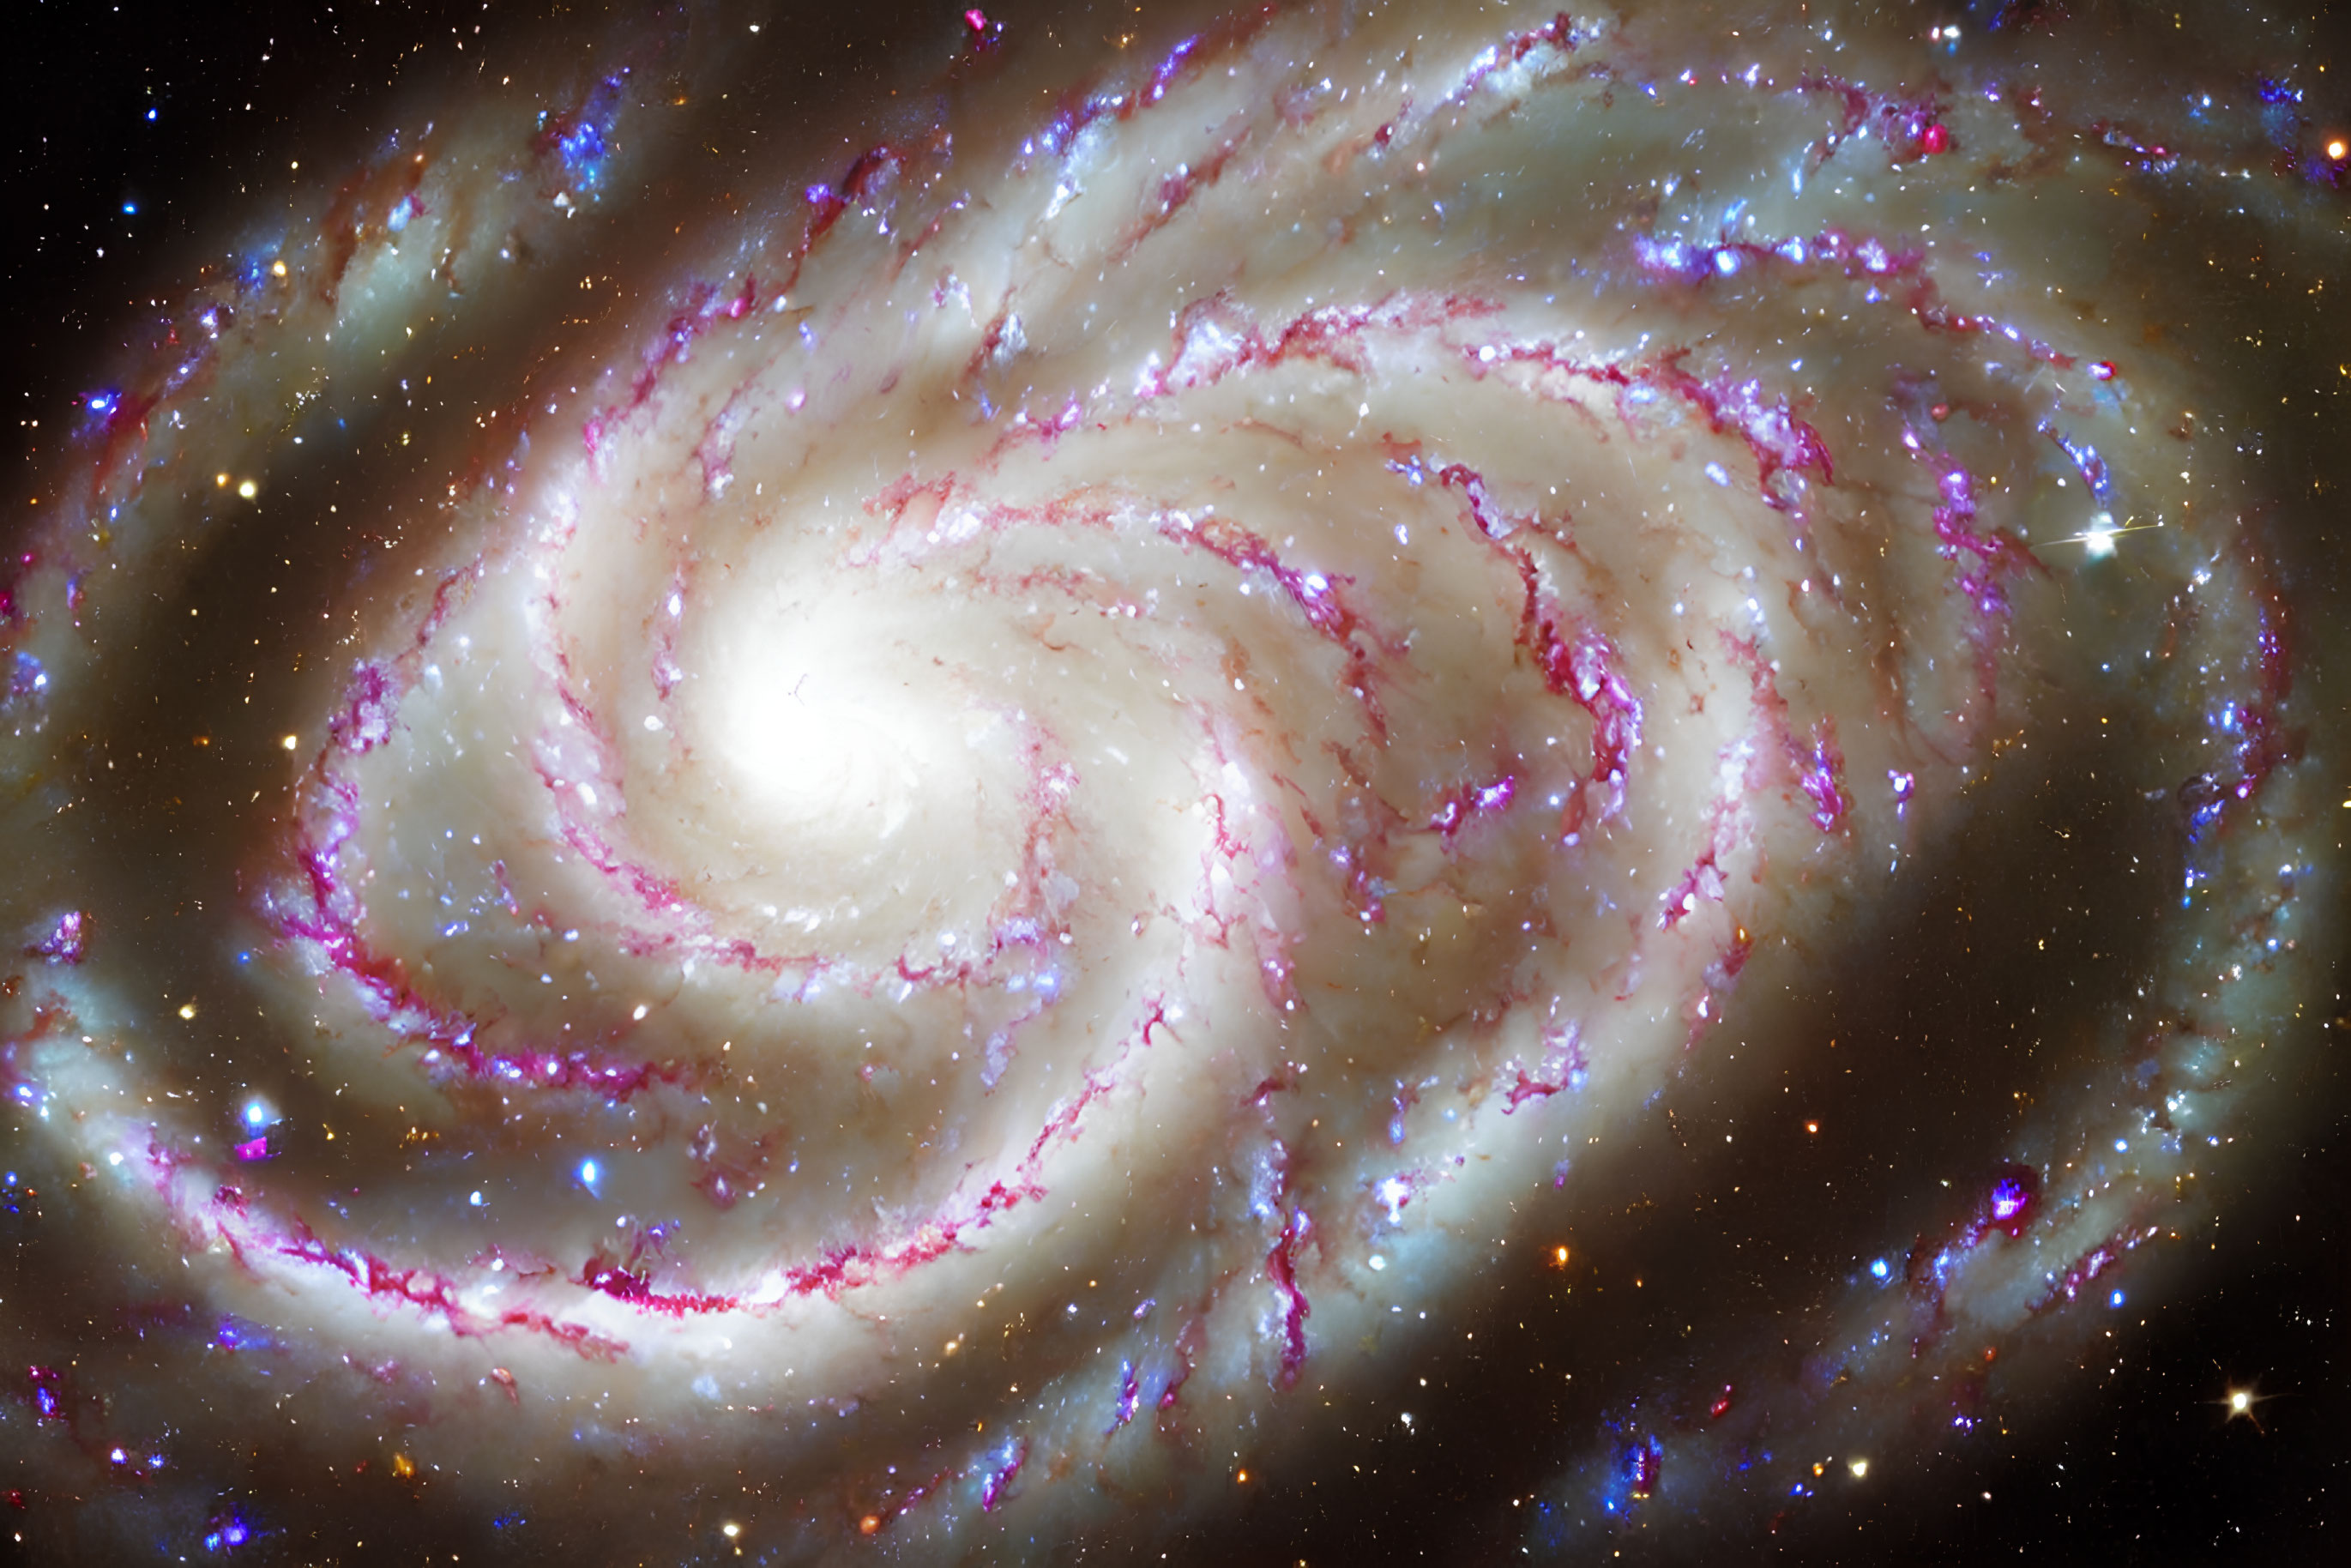 Spiral Galaxy with Pink Star-Forming Regions and Blue Star Clusters